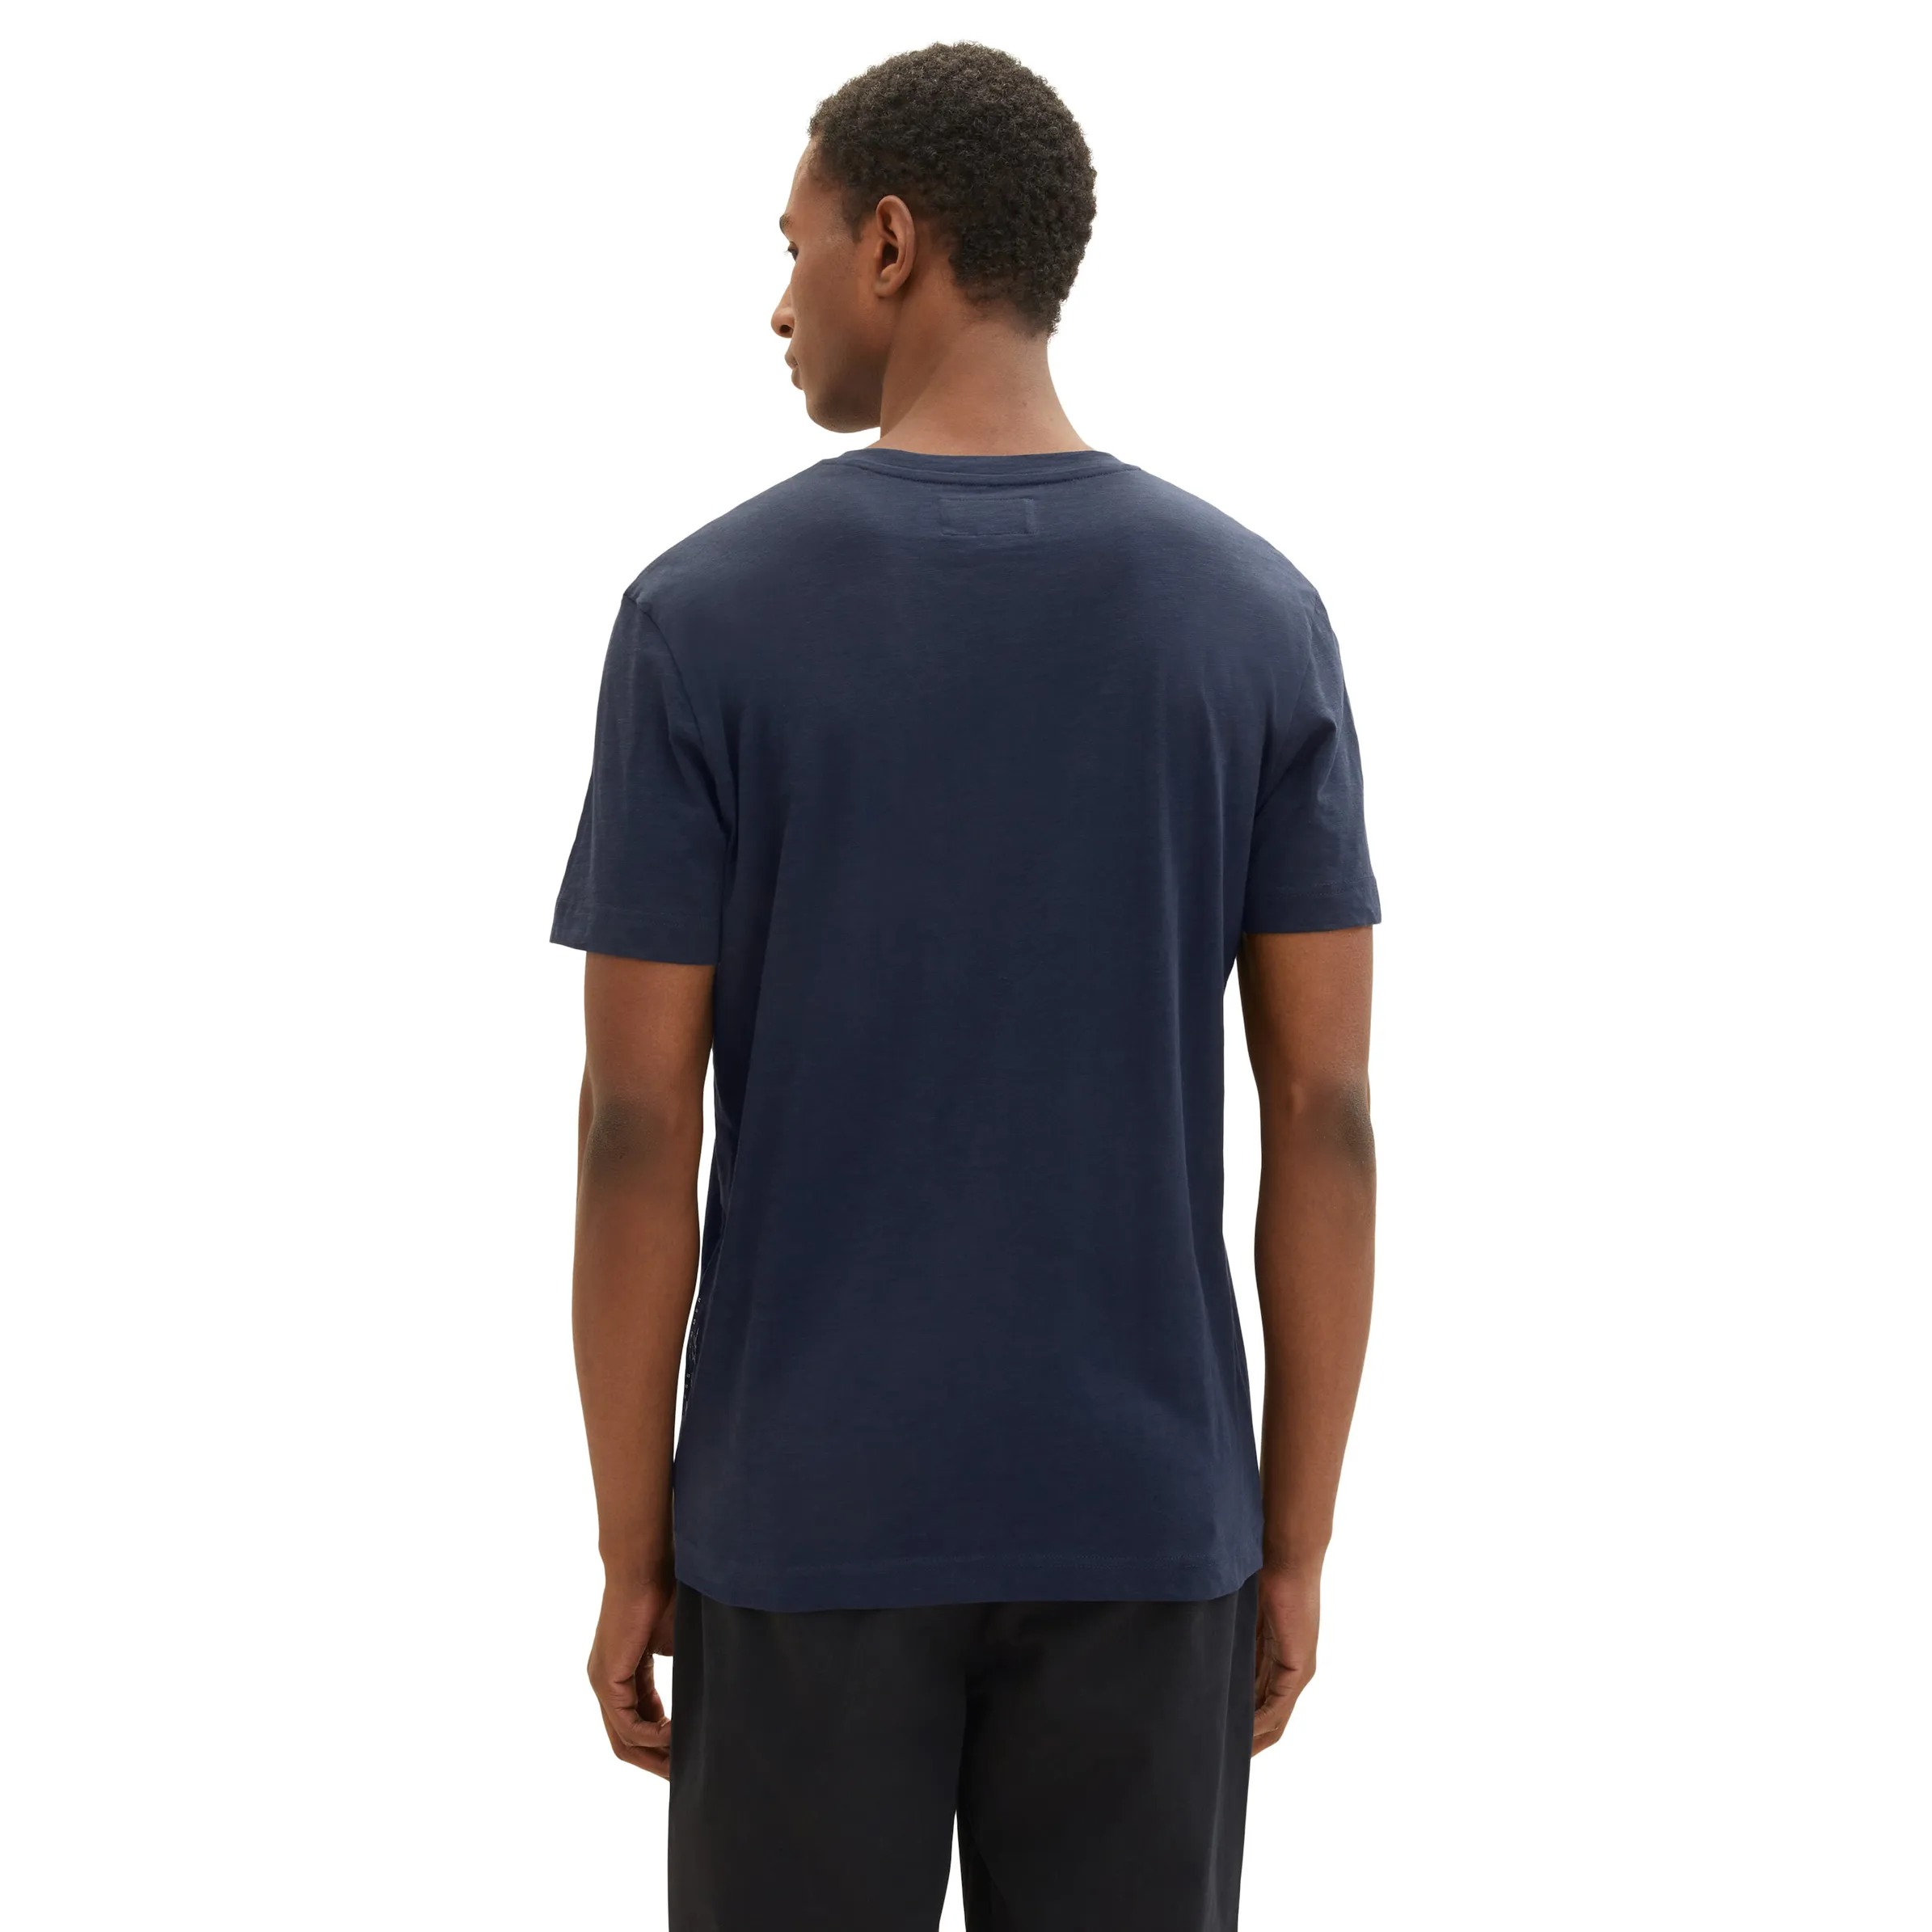 Tom Tailor 1036371 structured t-shirt with pocket Blau 880571 10668 2